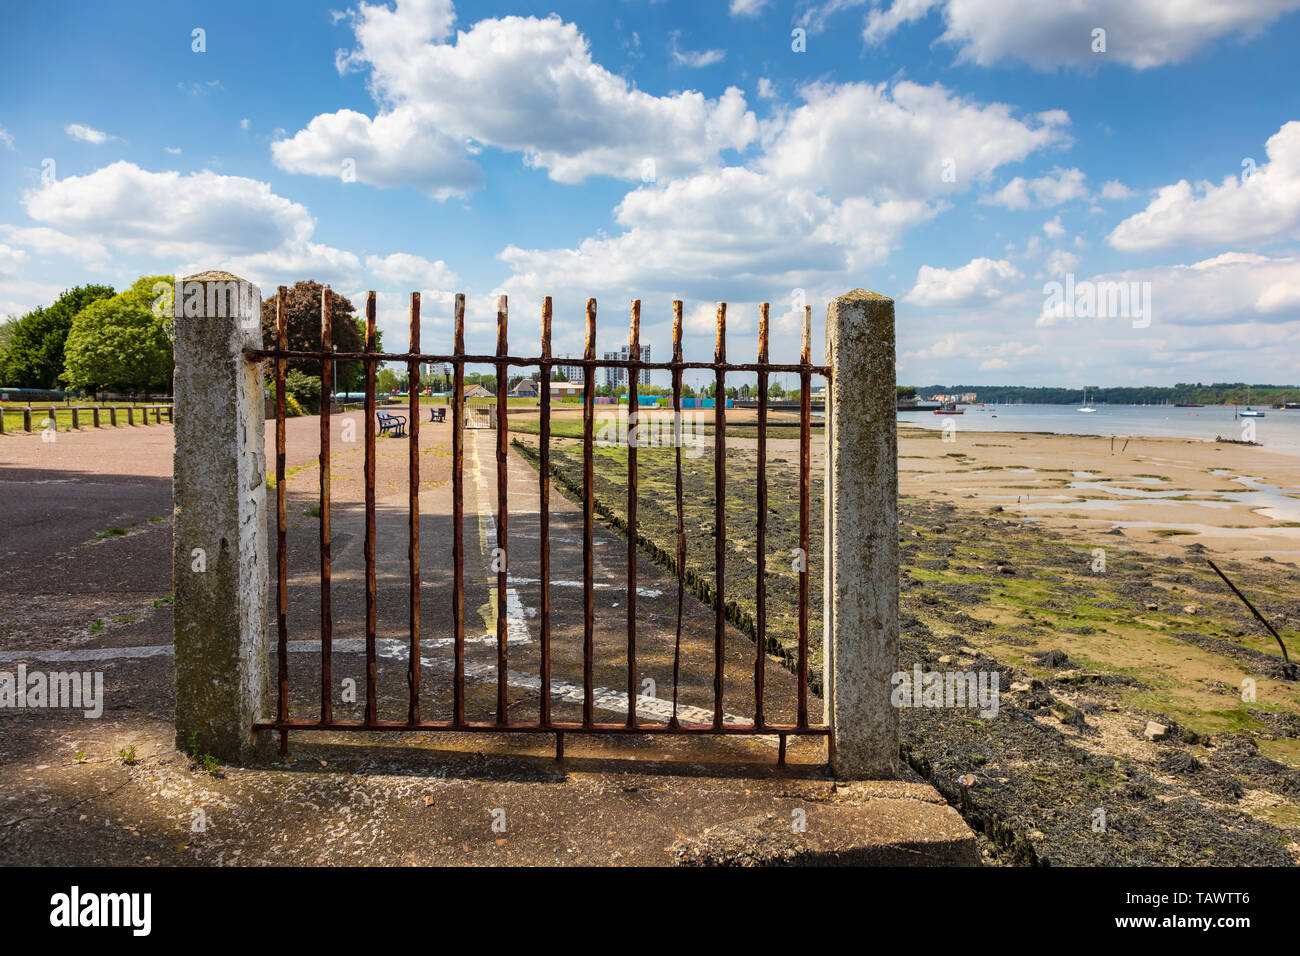 A rusty iron fence placed to stop users of The Strand Promenade in Gillingham from falling gives an  attractive view to the scene, Kent, UK Stock Photo